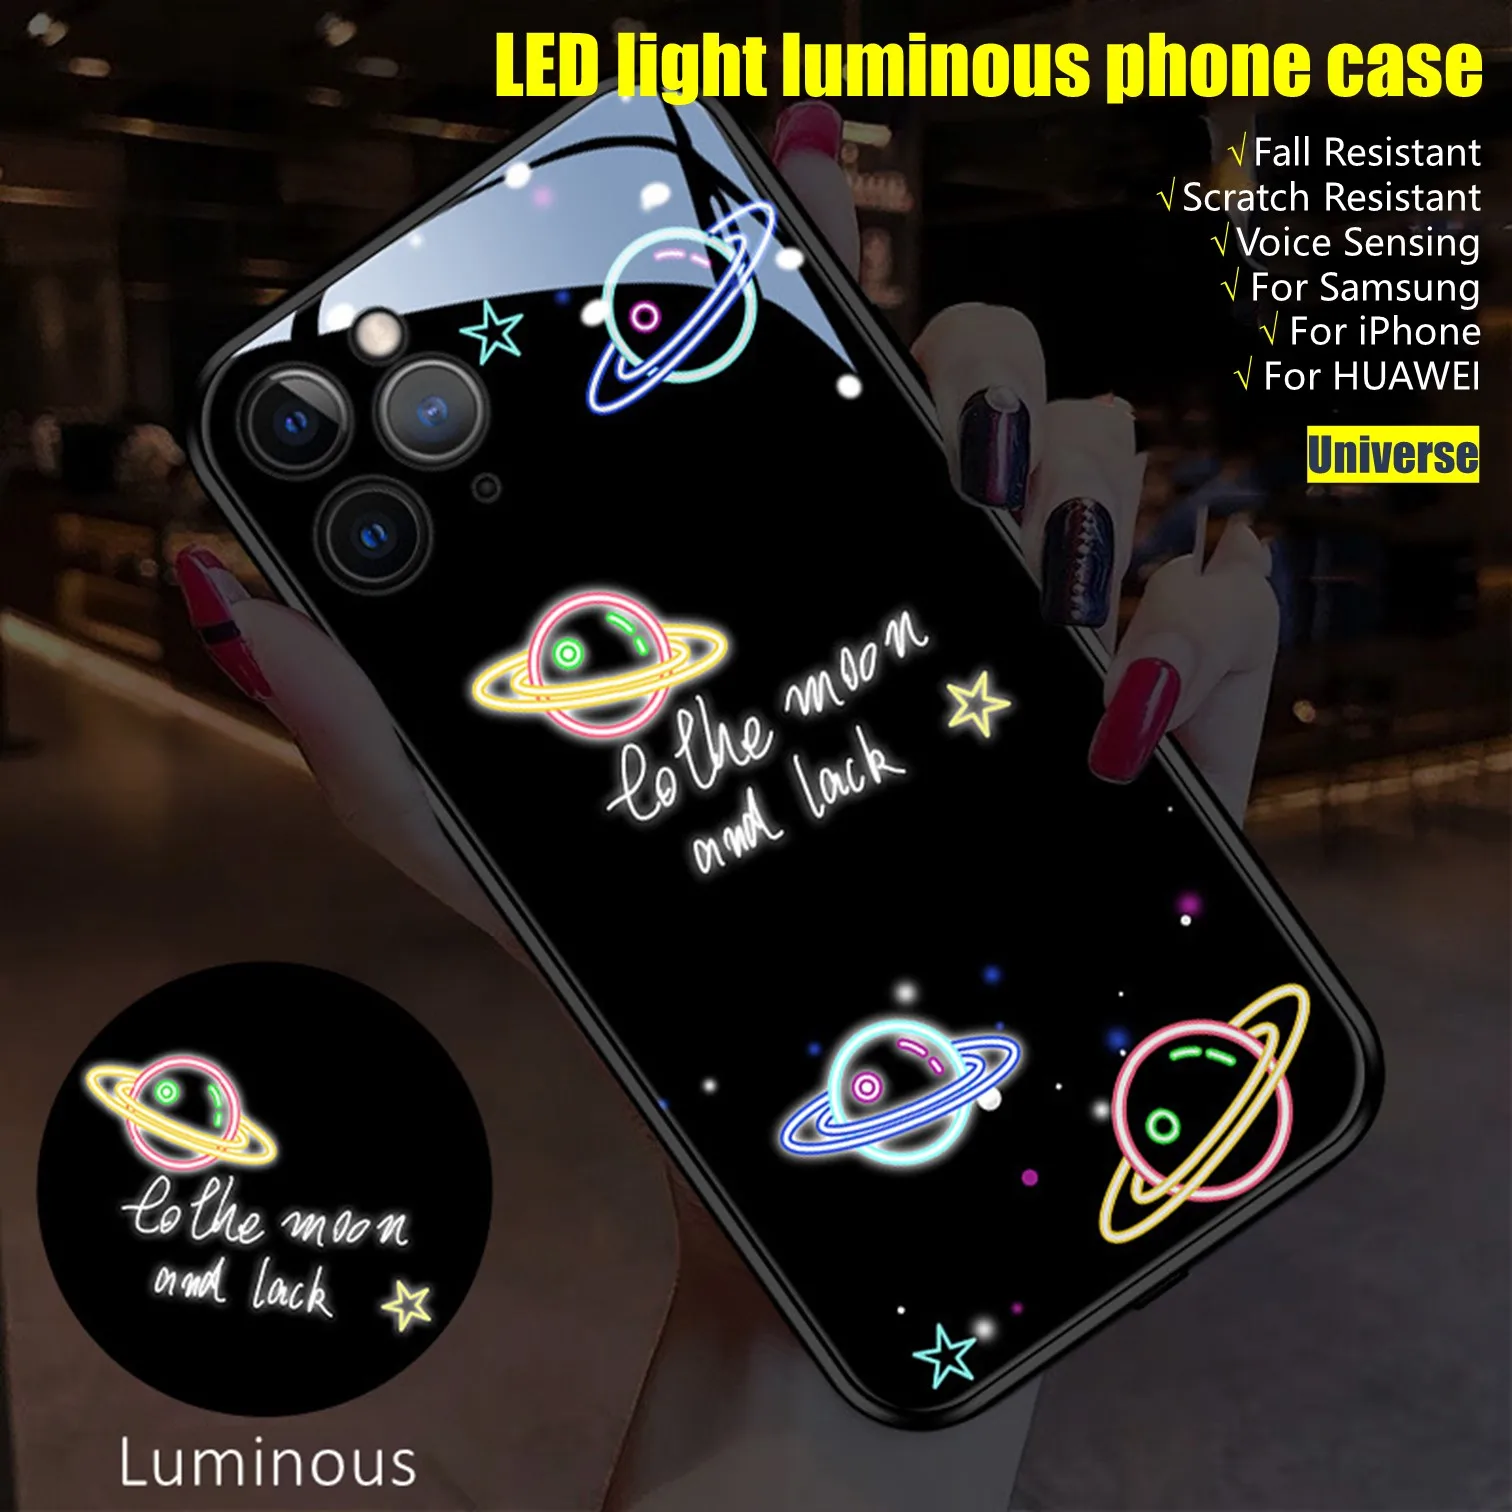 

Universe Voice Sensing LED Luminous Phone Case for iPhone Samsung Huawei Fall and Scratch Resistant Accessories for Trendsetters